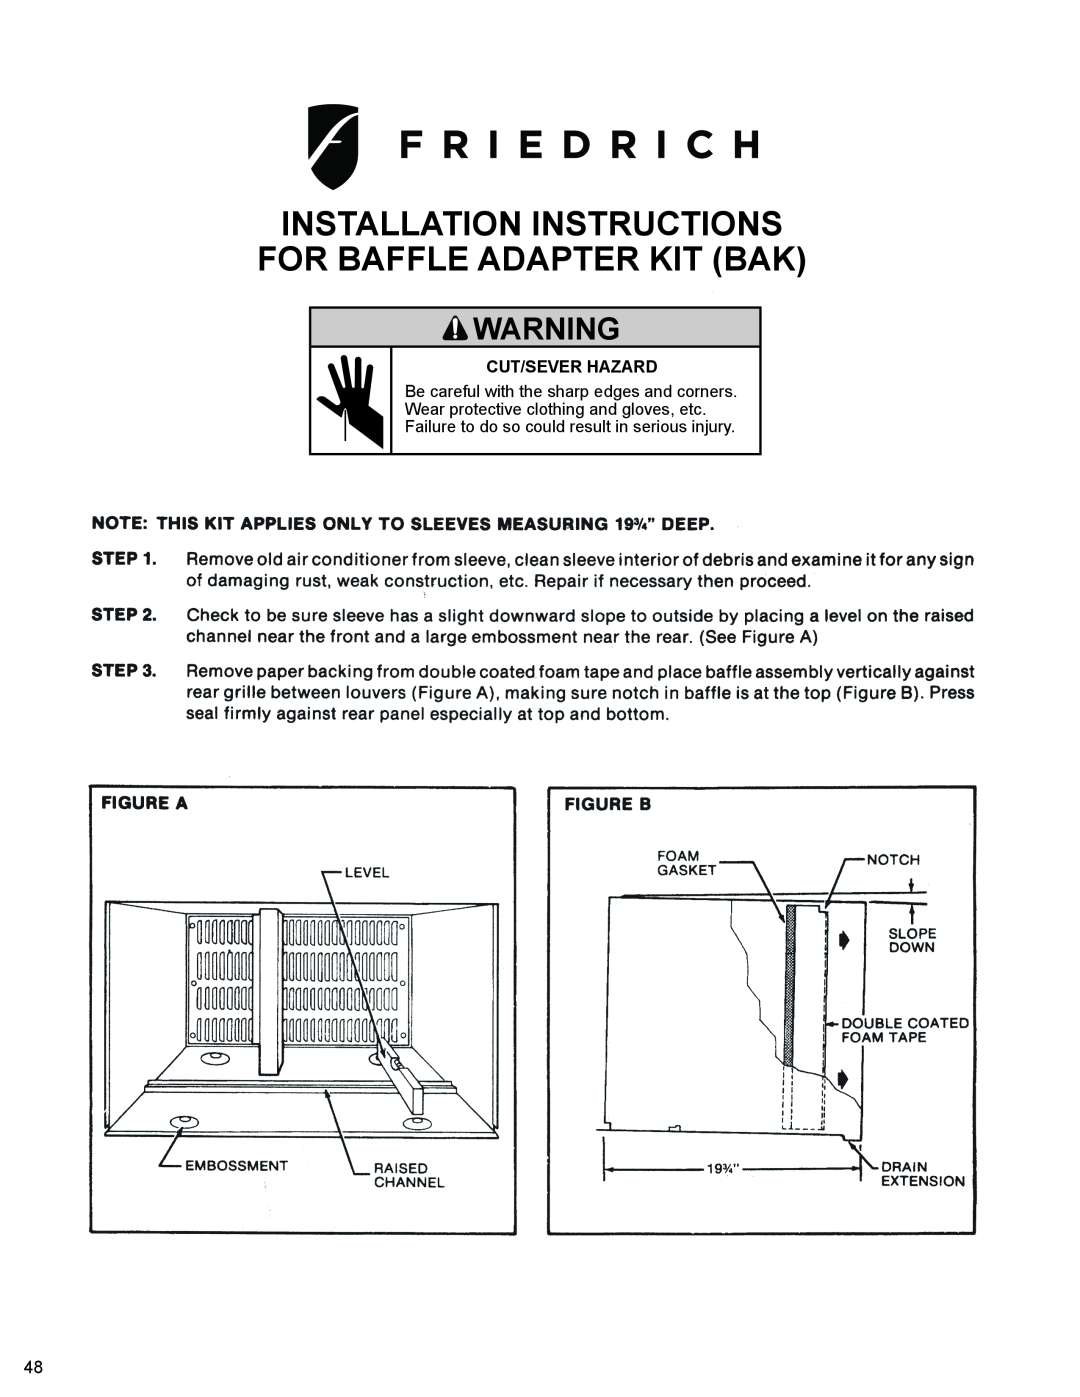 Friedrich WS10B10 service manual Mechanicalcut/Sever Hazard, Be careful with the sharp edges and corners 